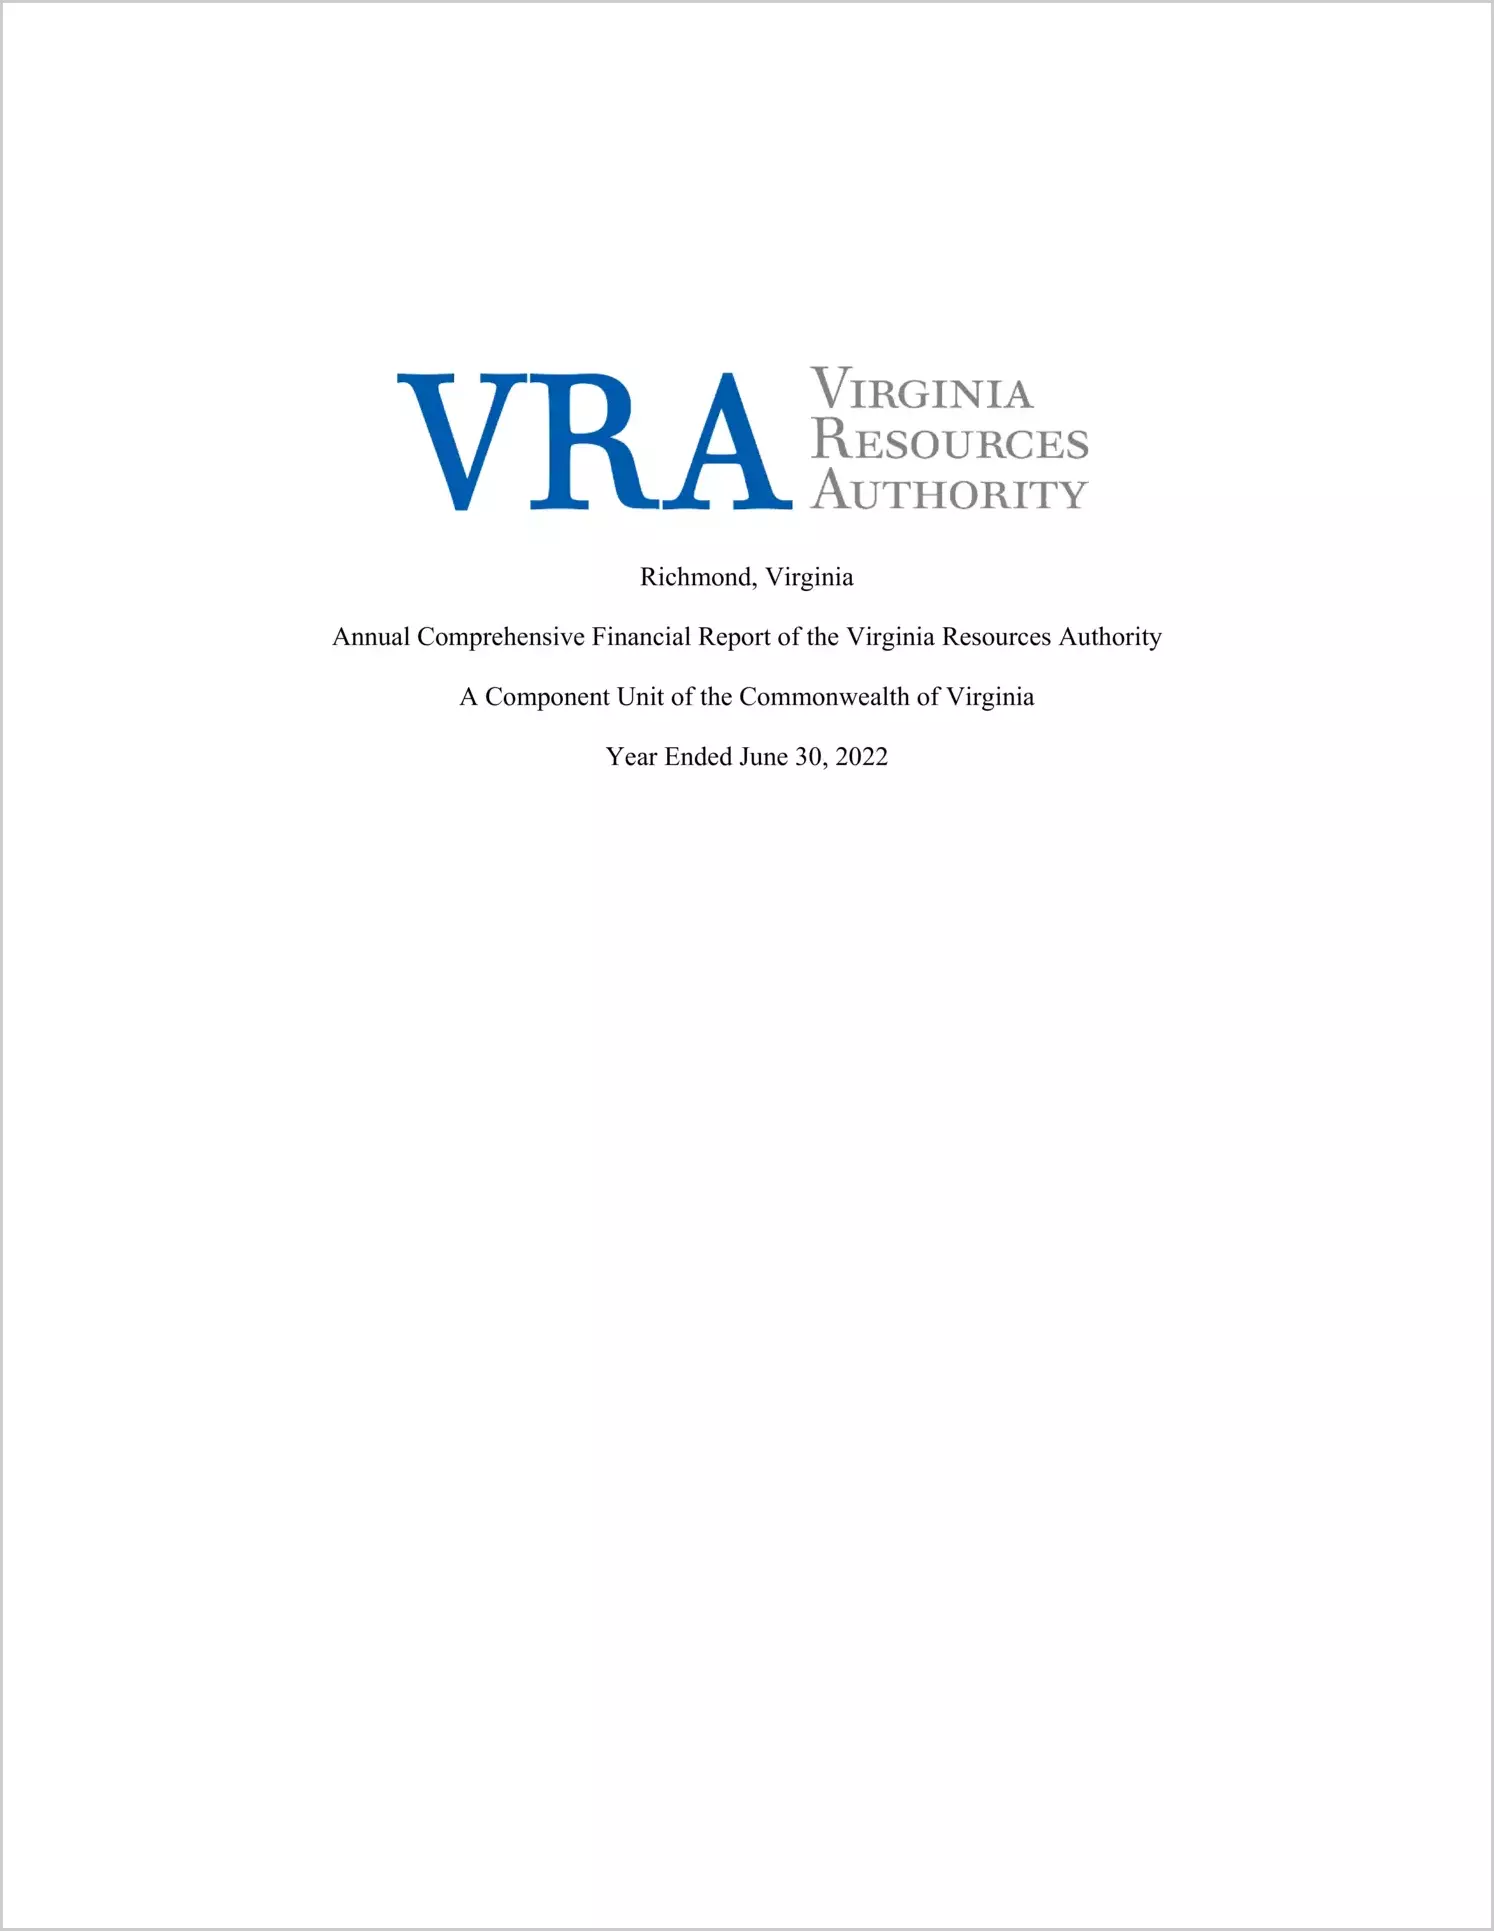 Virginia Resources Authority Financial Statements for the fiscal year ended June 30, 2022